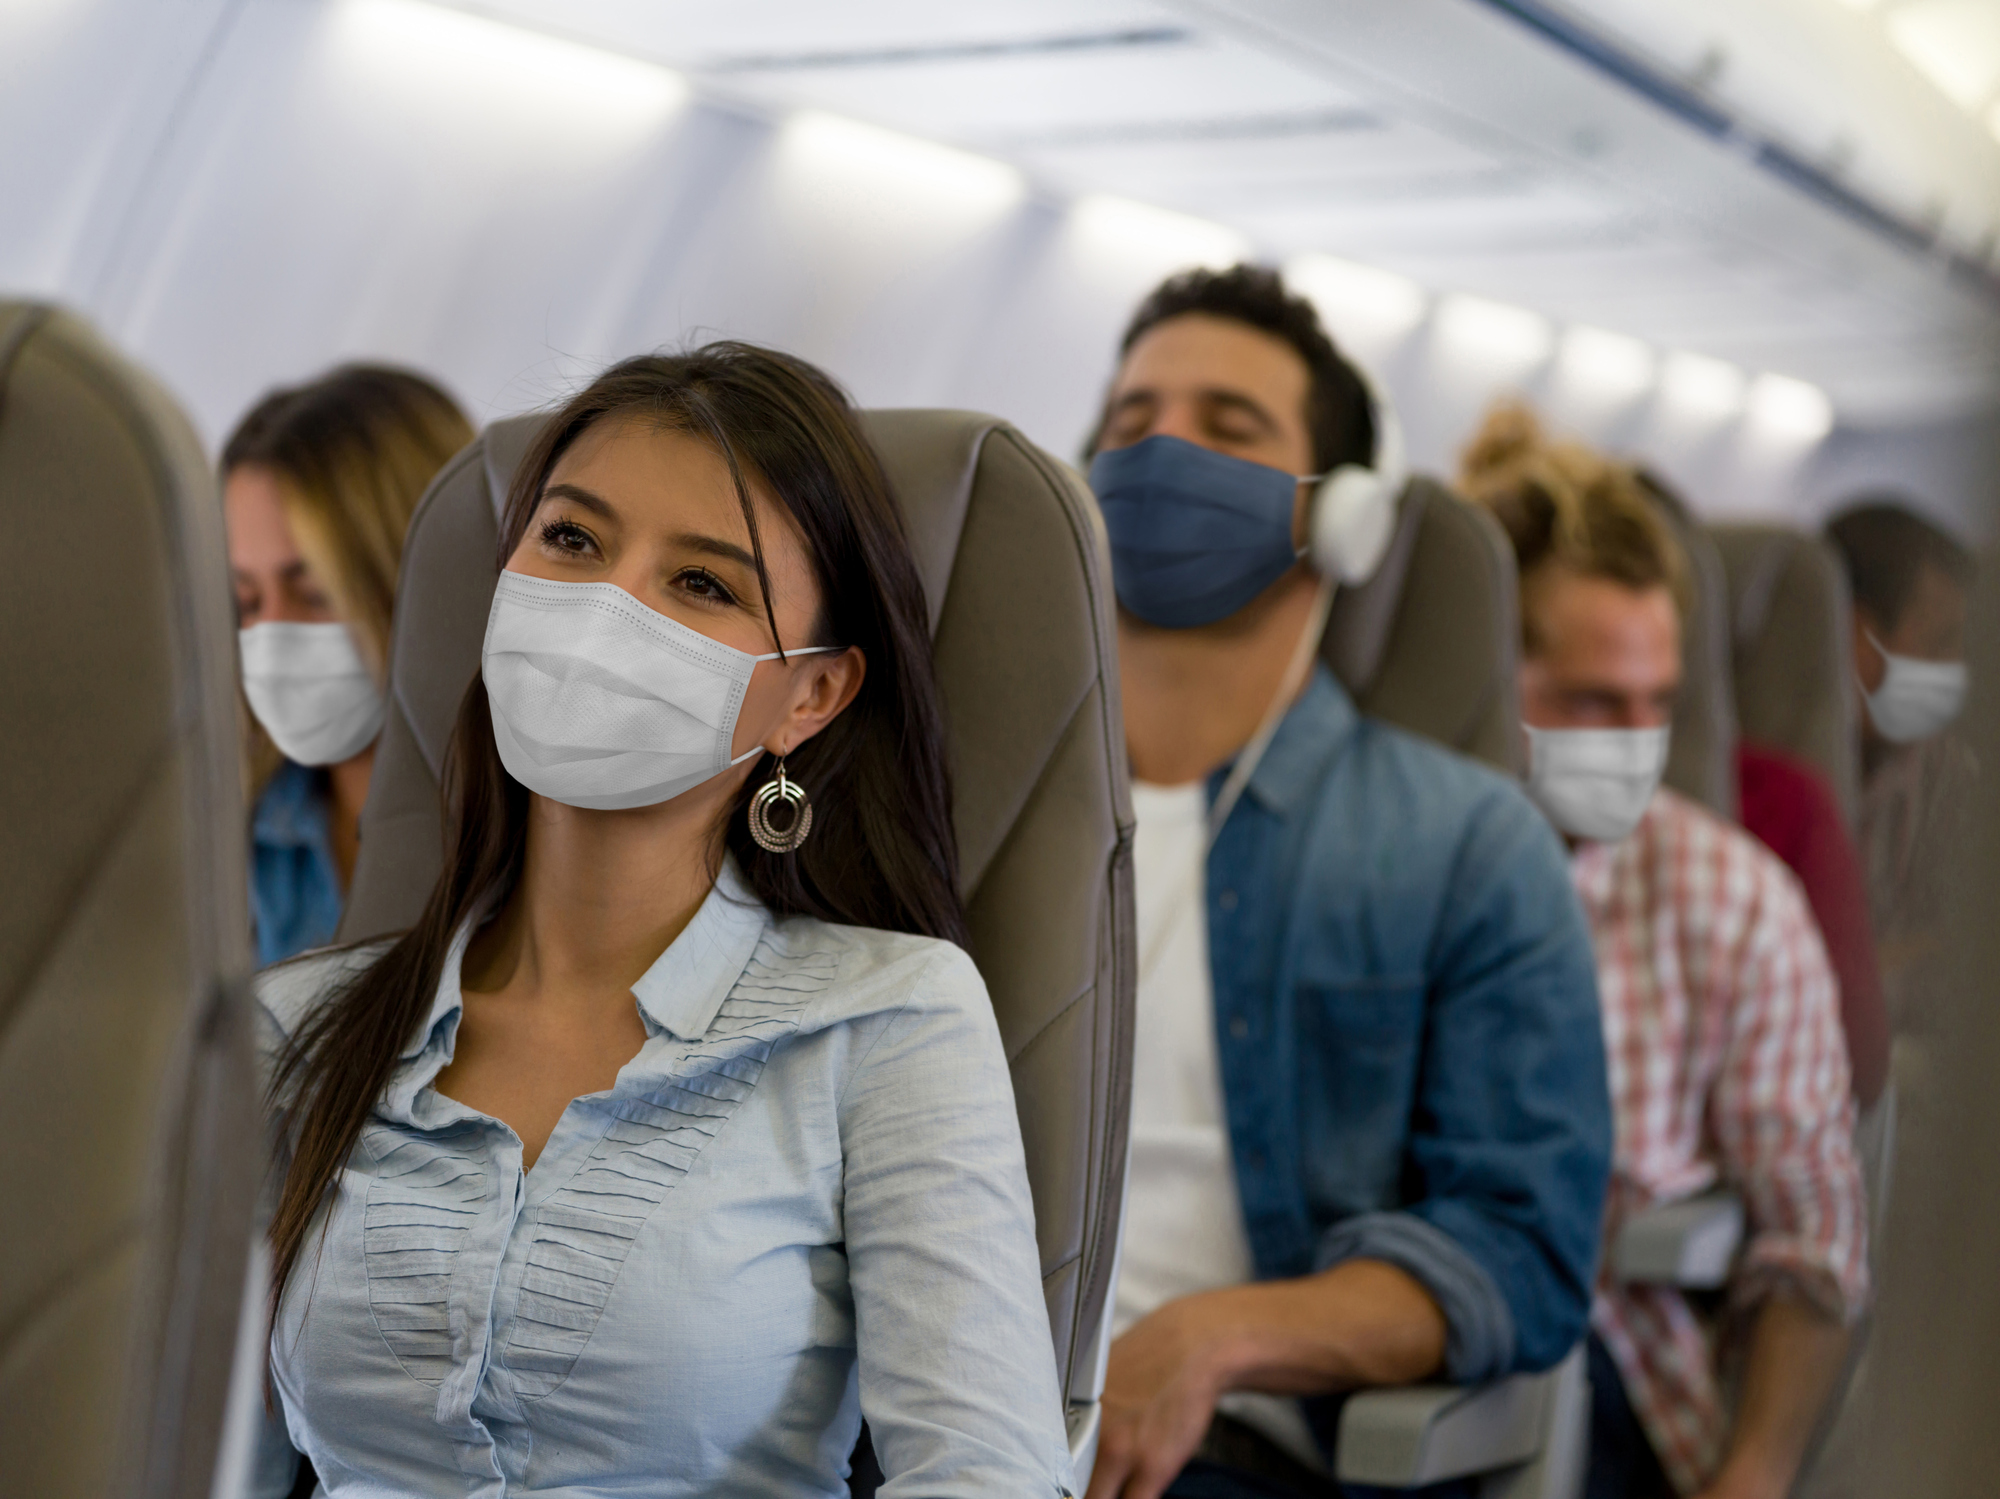 People with masks on on a plane.